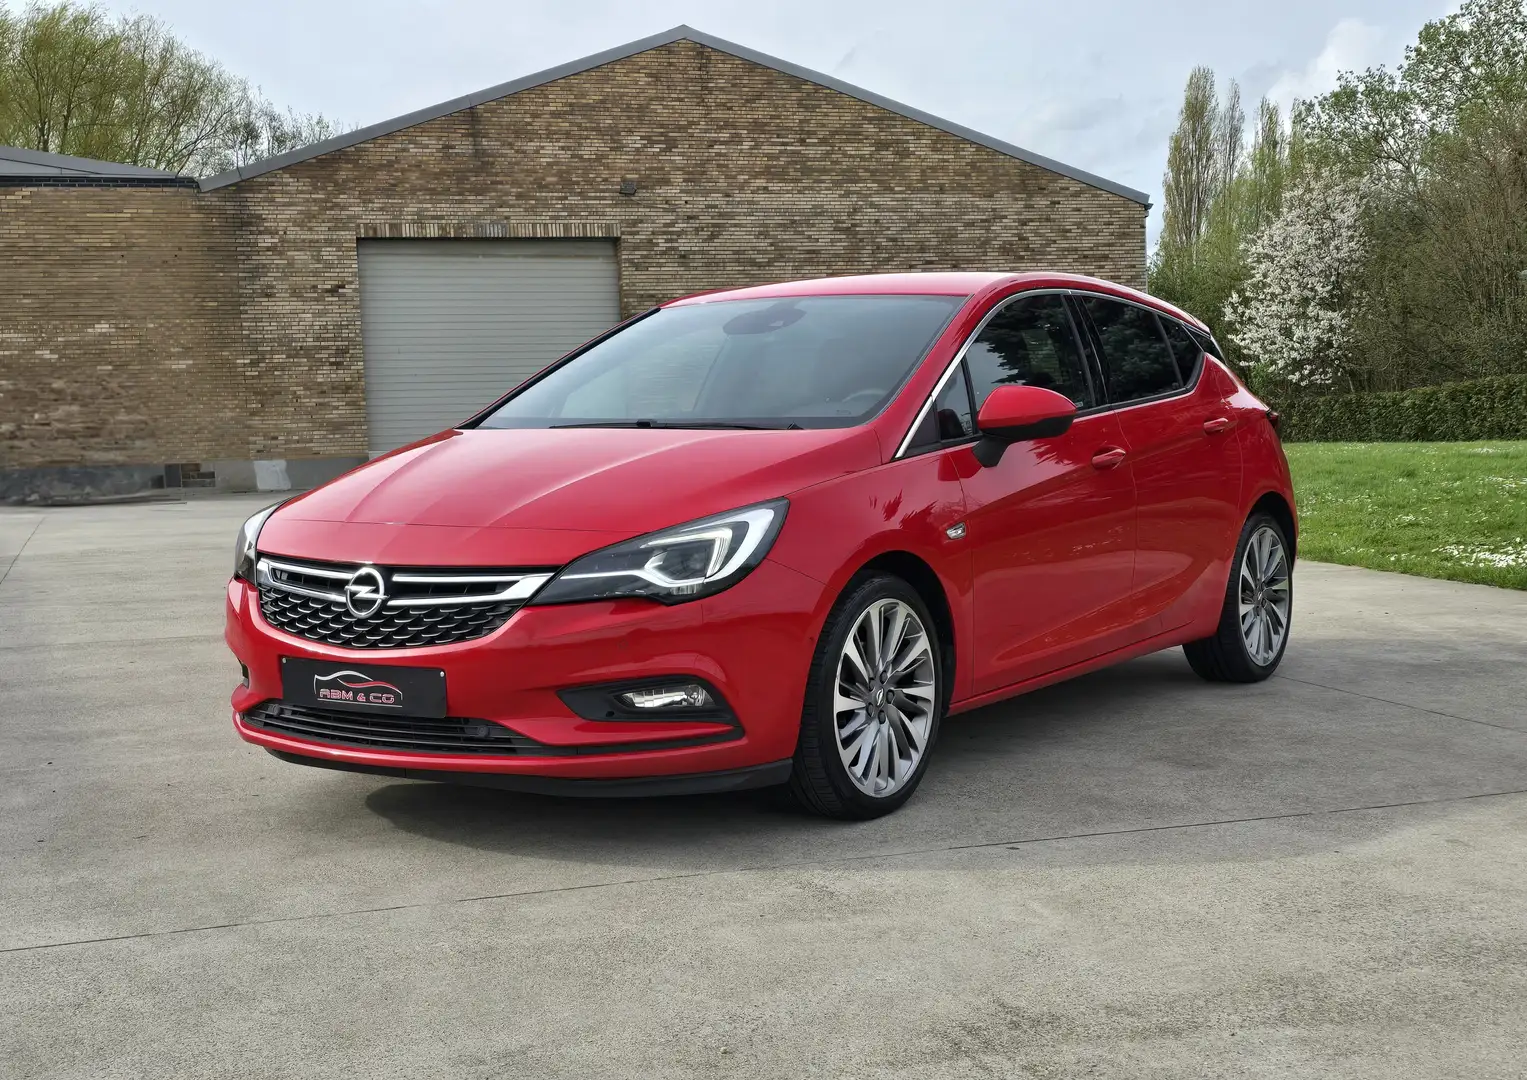 Opel Astra 1.4i Turbo 150 cv ** LED - Cuir - Caméra ** Rouge - 2